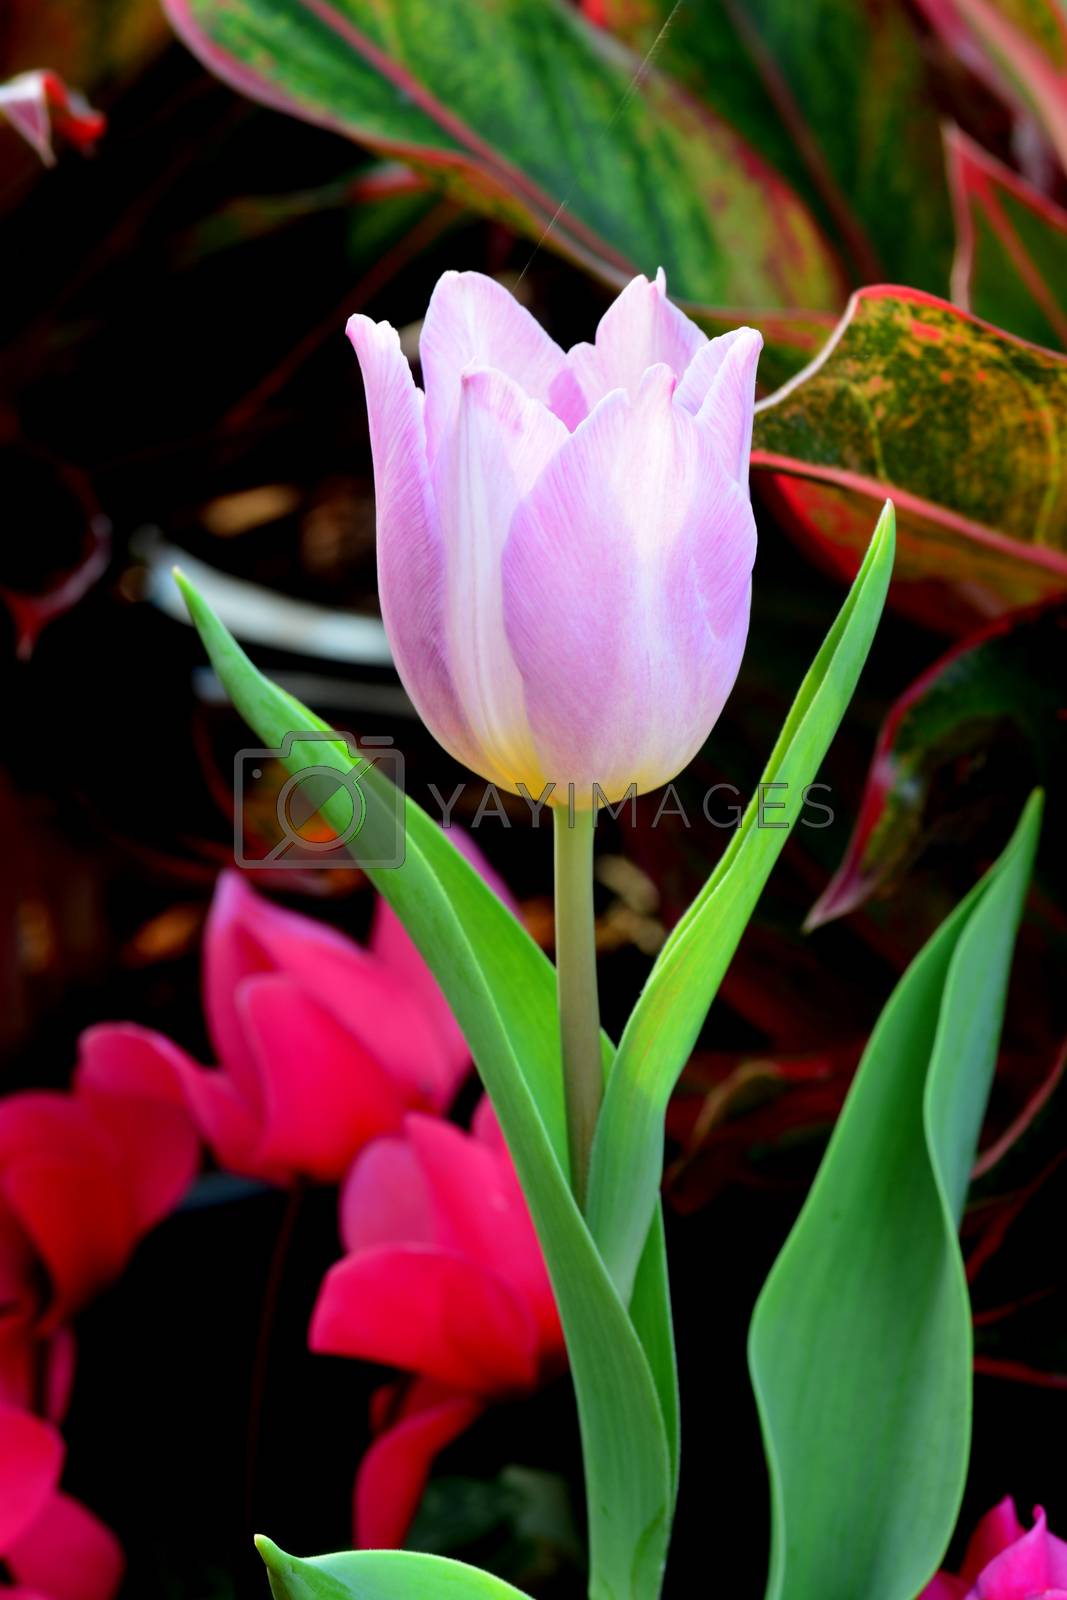 Royalty free image of PinkTulip by ideation90